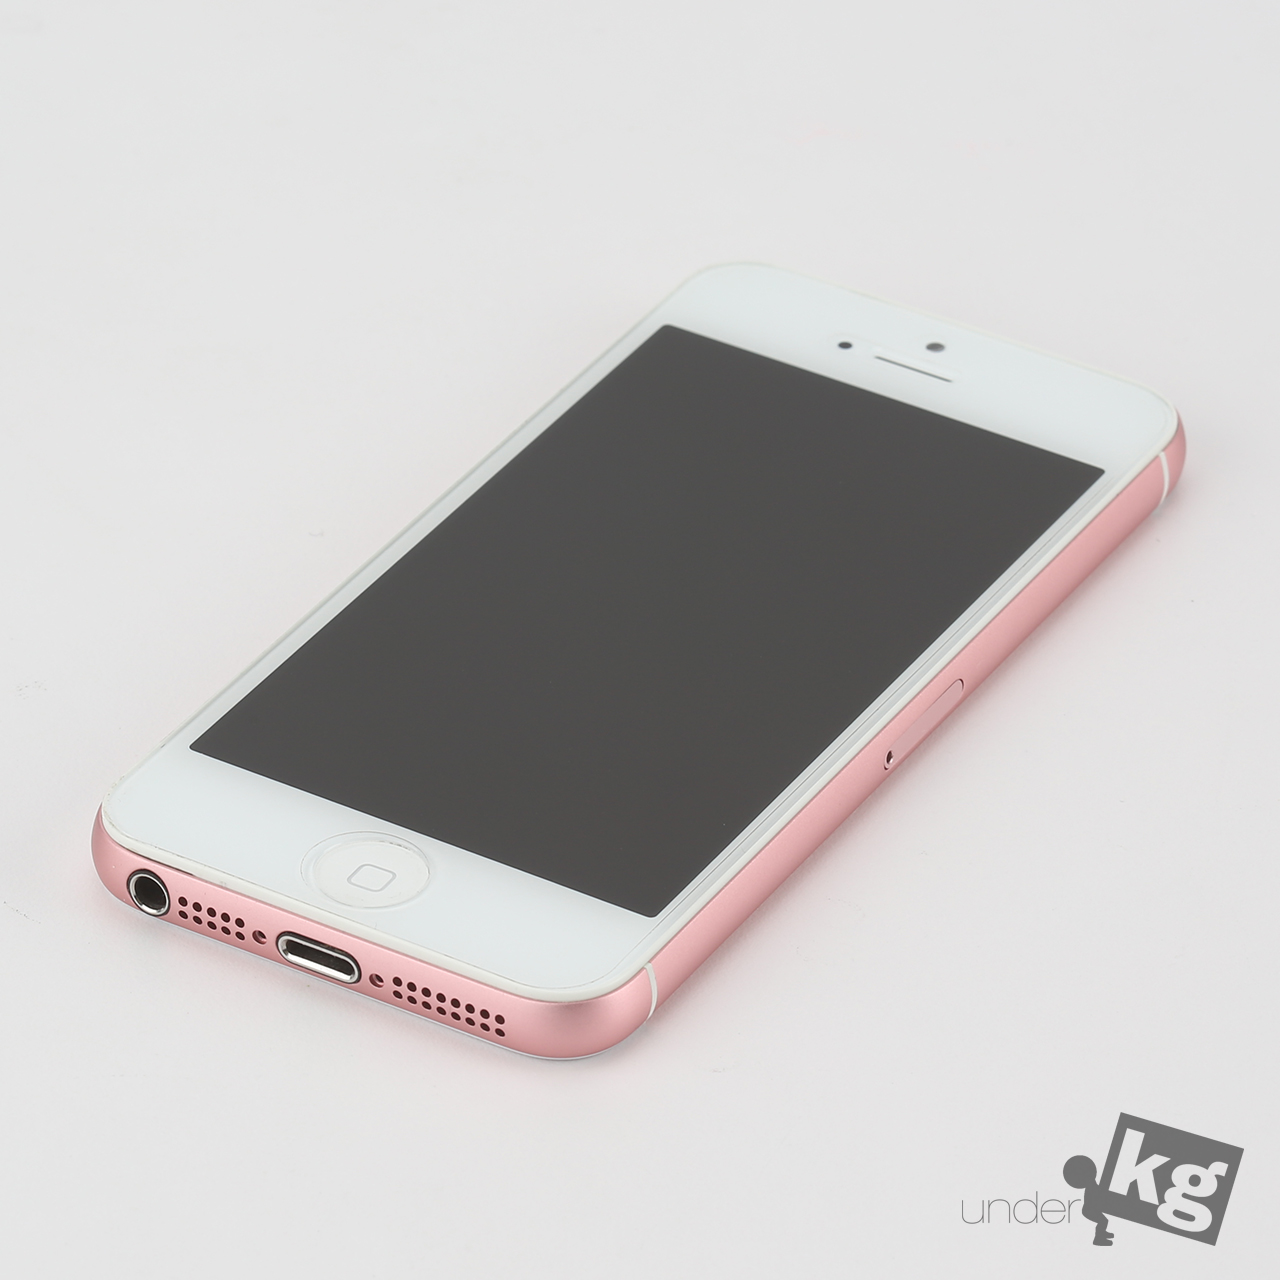 iphone5-to-iphone6-housing-change-pic3.jpg